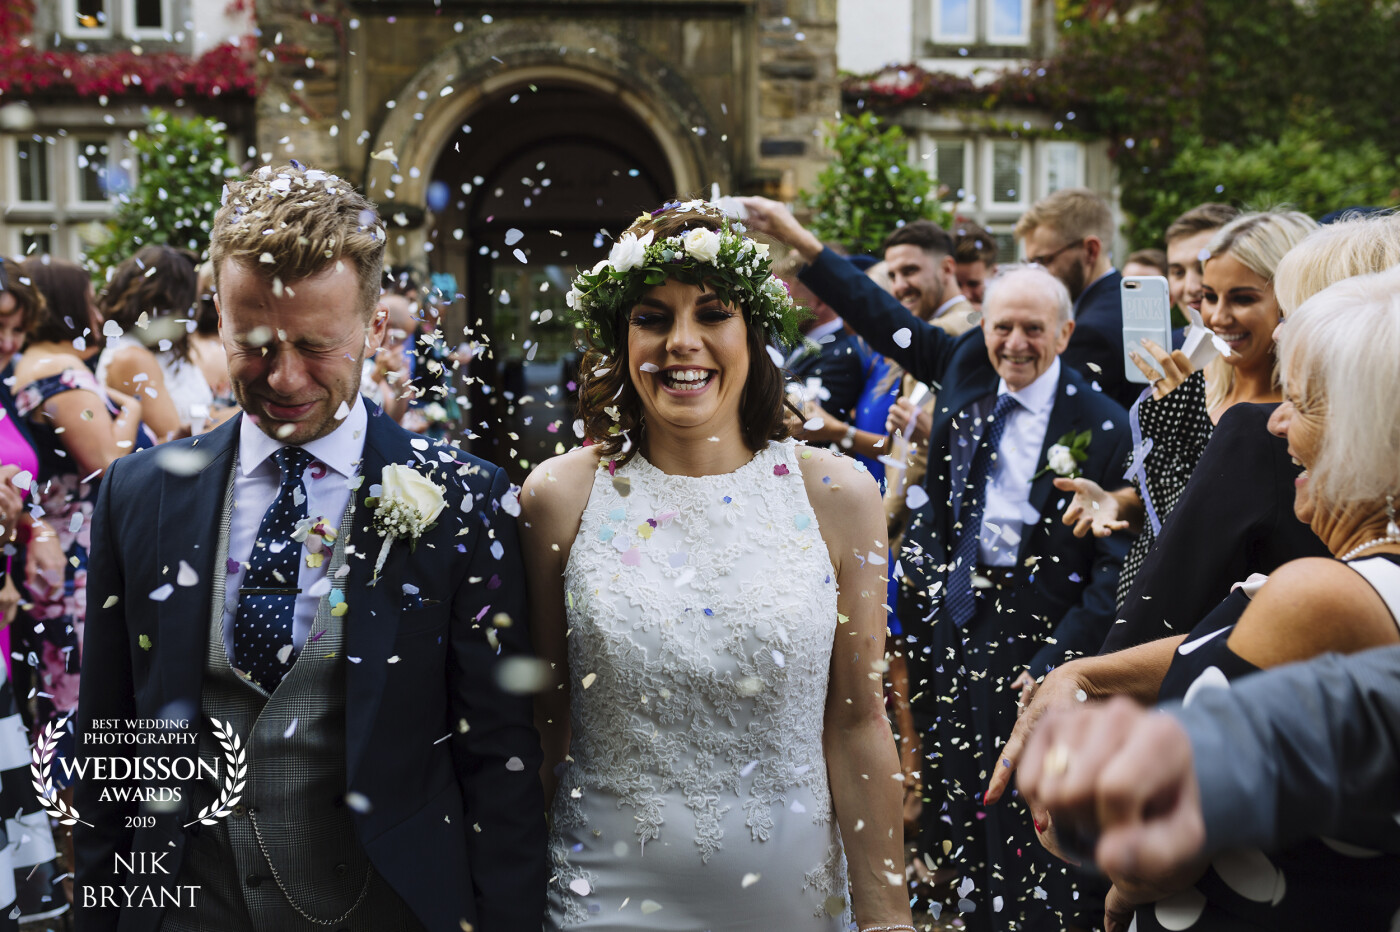 I love a great confetti shot and this is just that! The smiles, laughter, and face full of confetti! Taken at Mitton Hall in Lancashire on such a brilliant wedding day for Tom and Becks.